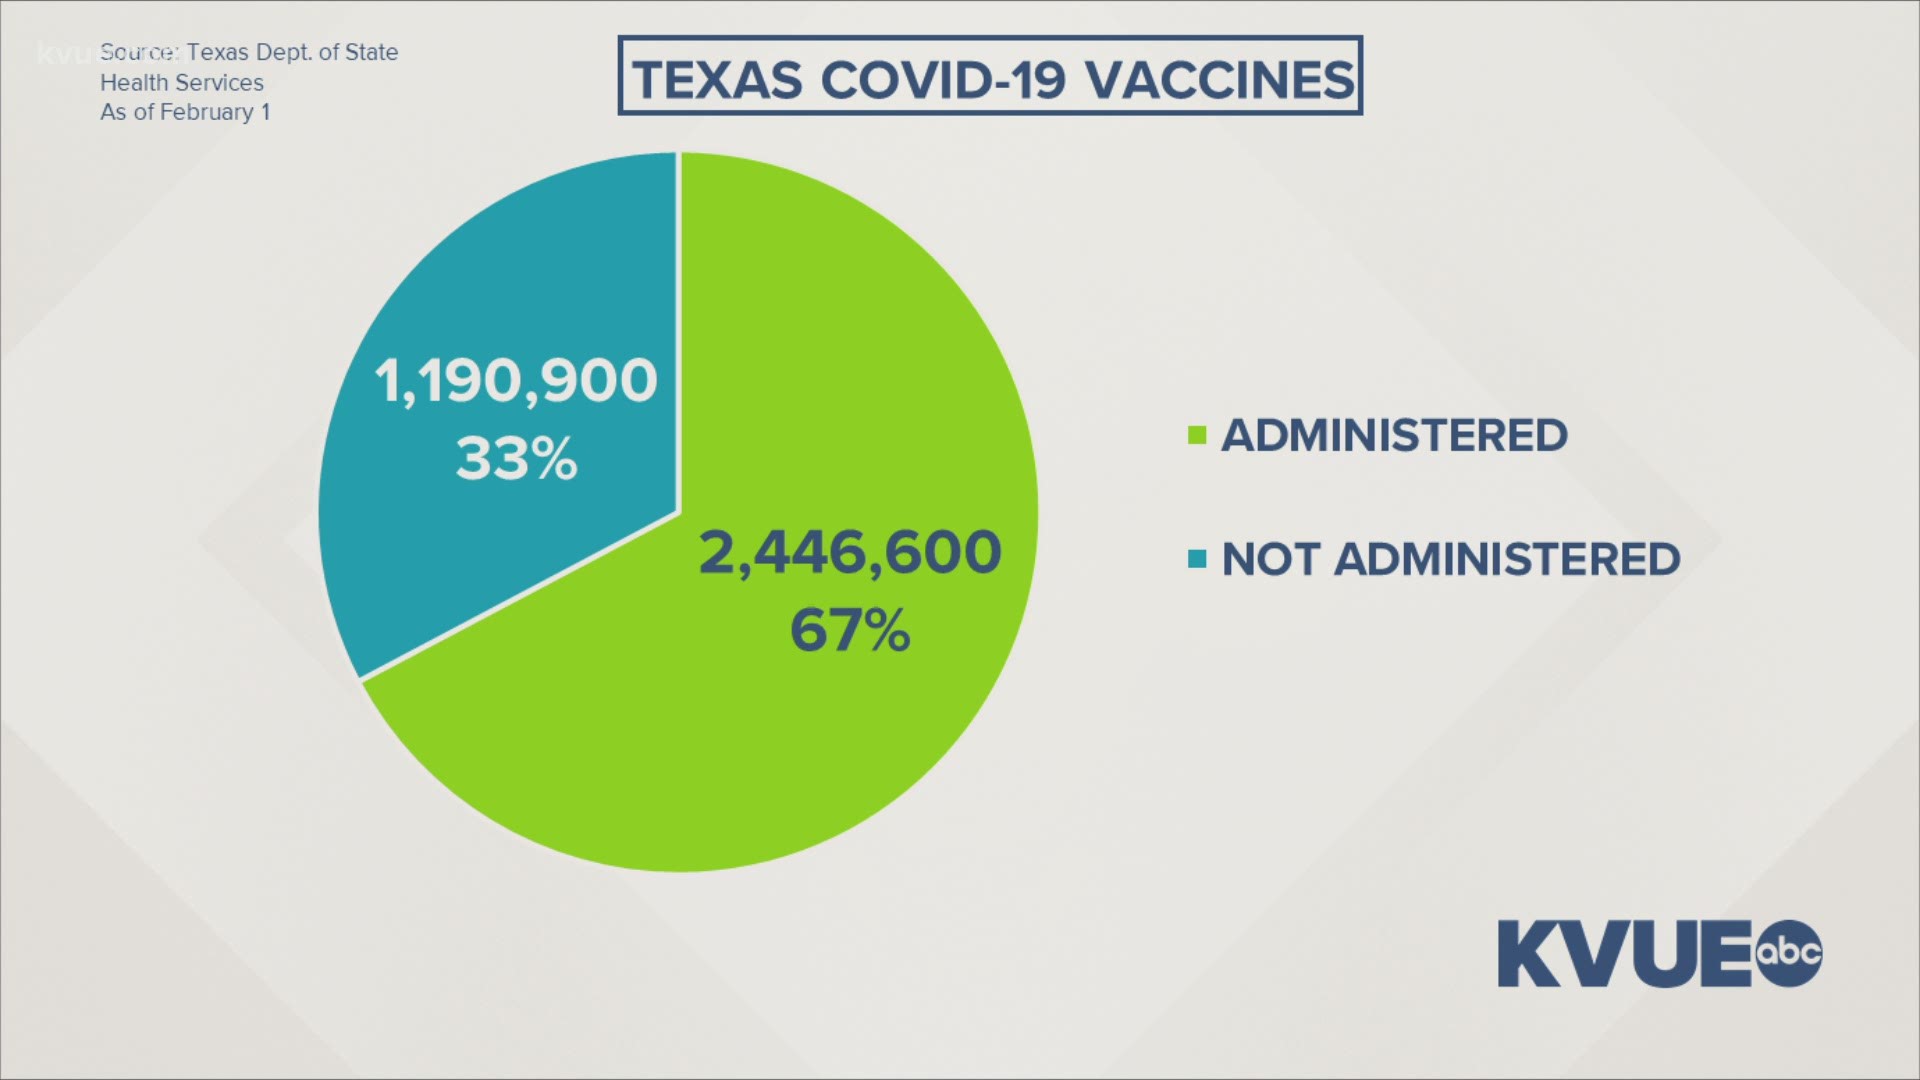 Nearly two million Texans have received at least one dose of COVID-19 vaccine.